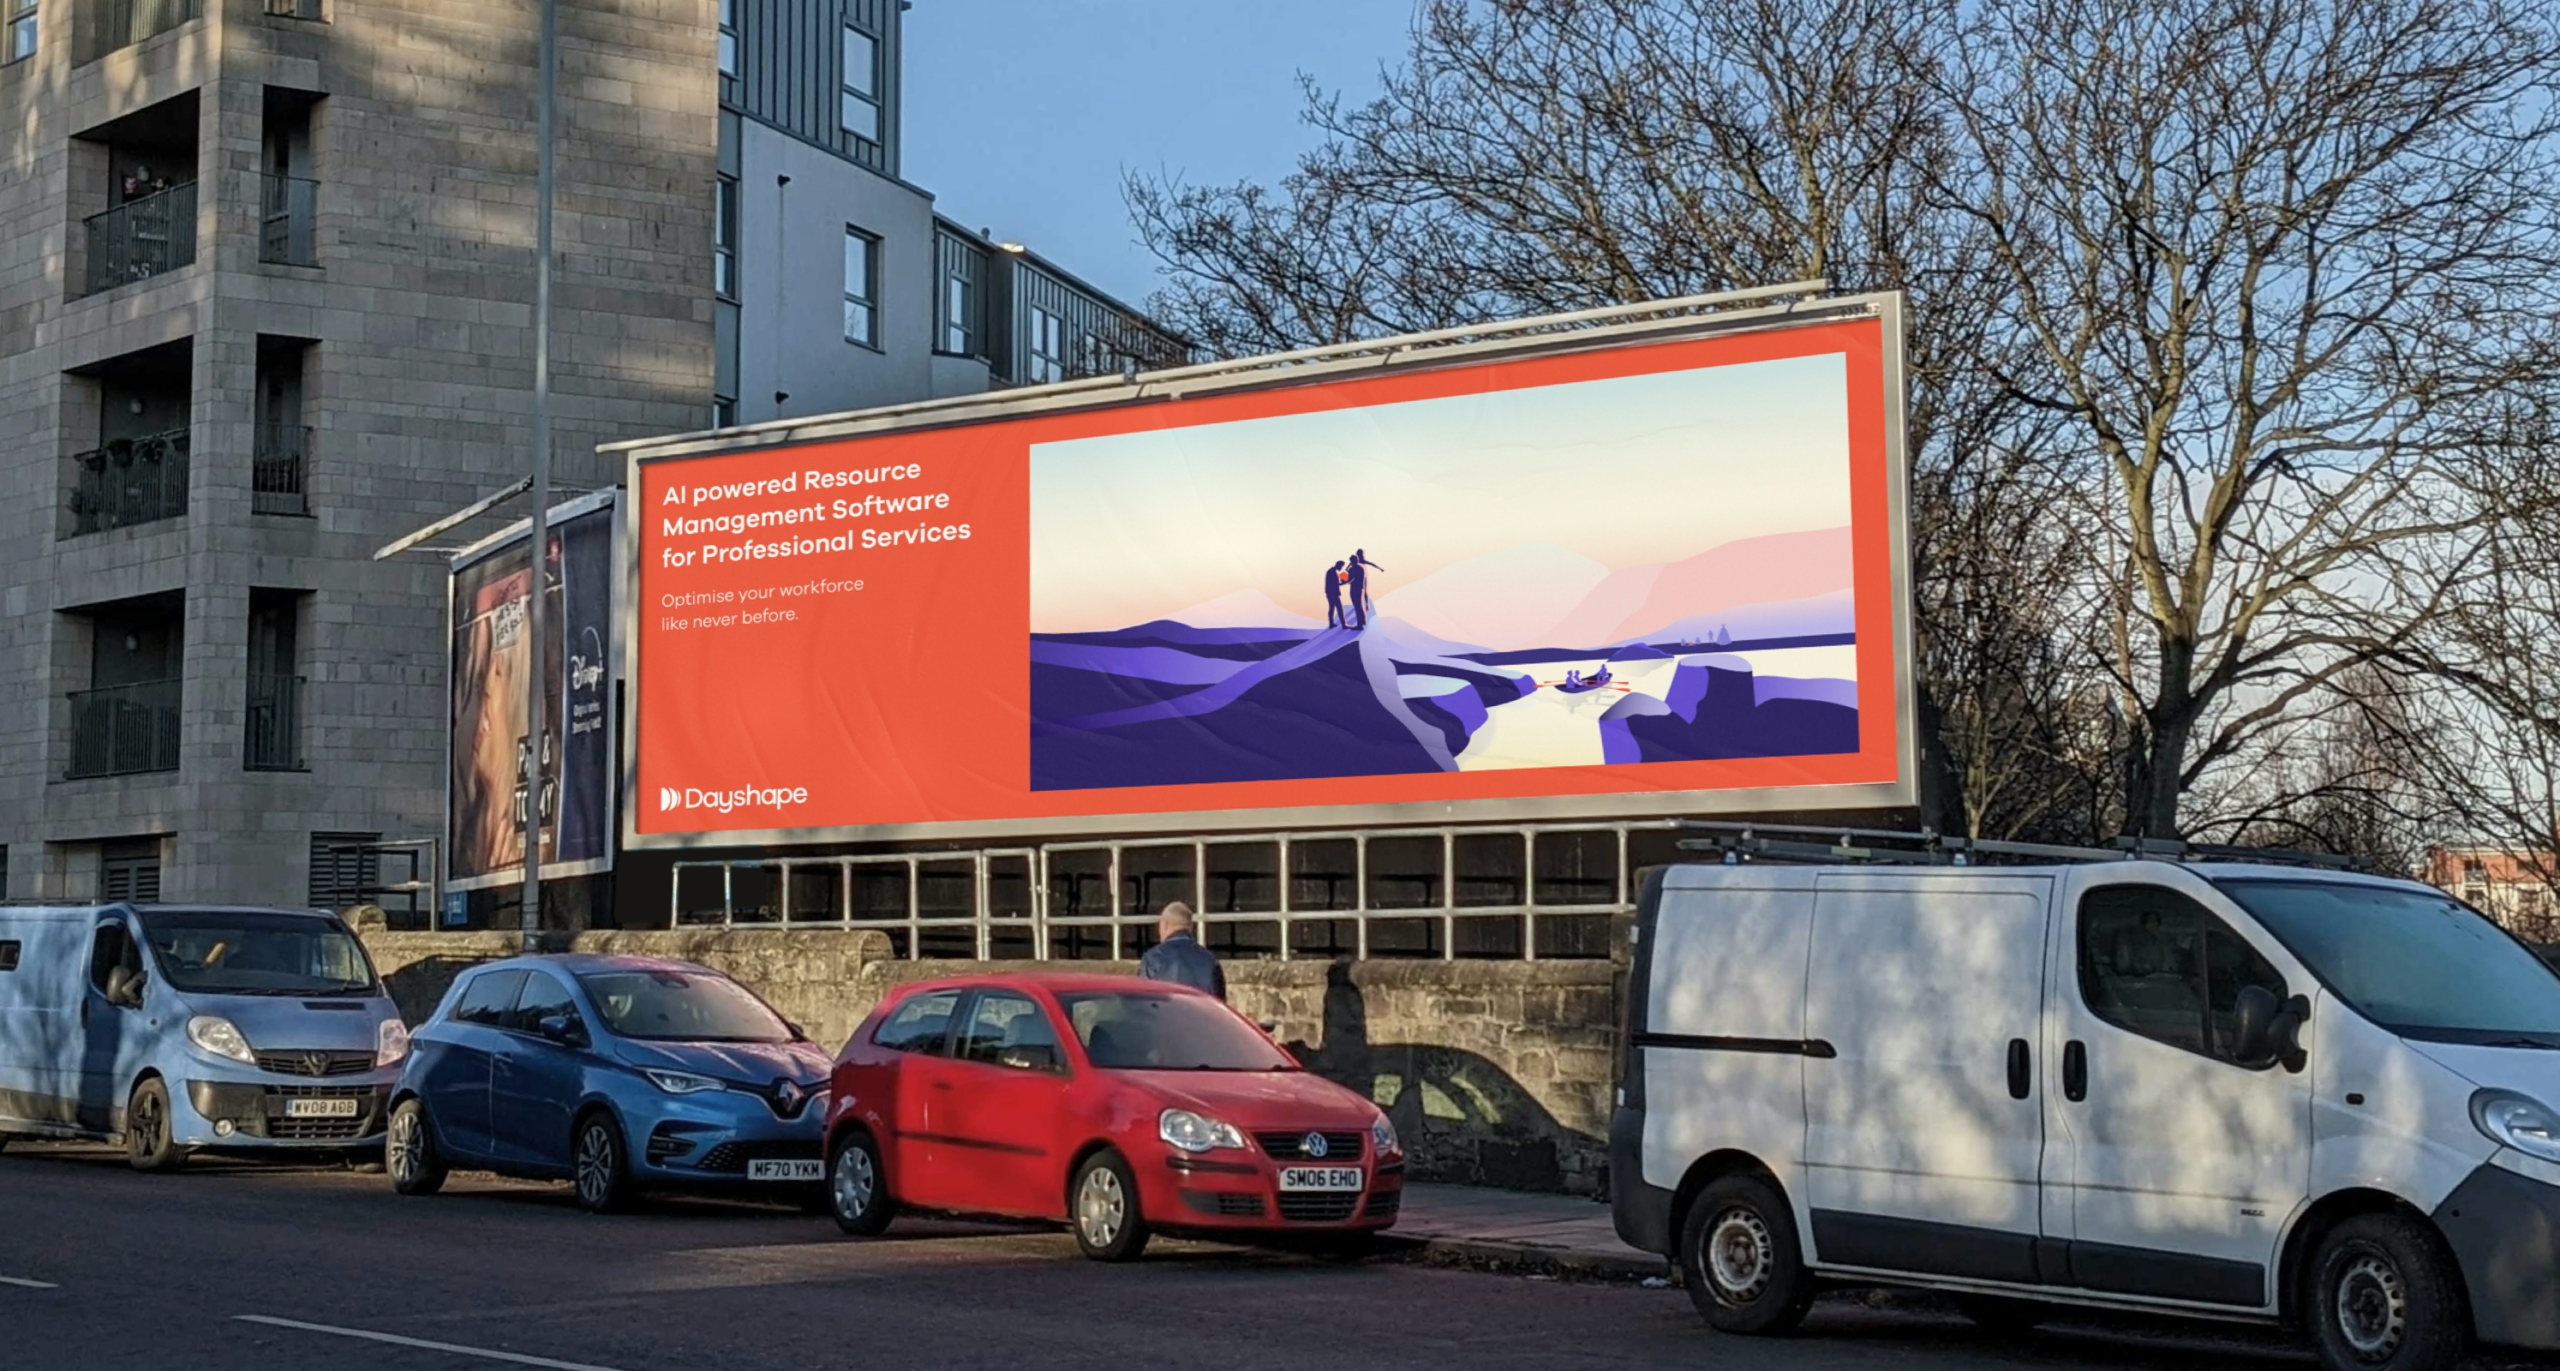 A orange billboard sits on a street stating l powered Resource Management Software for Professional Services.” and features three stylised people on to of a mountain. One figure points to a boat with three people sailing in it.